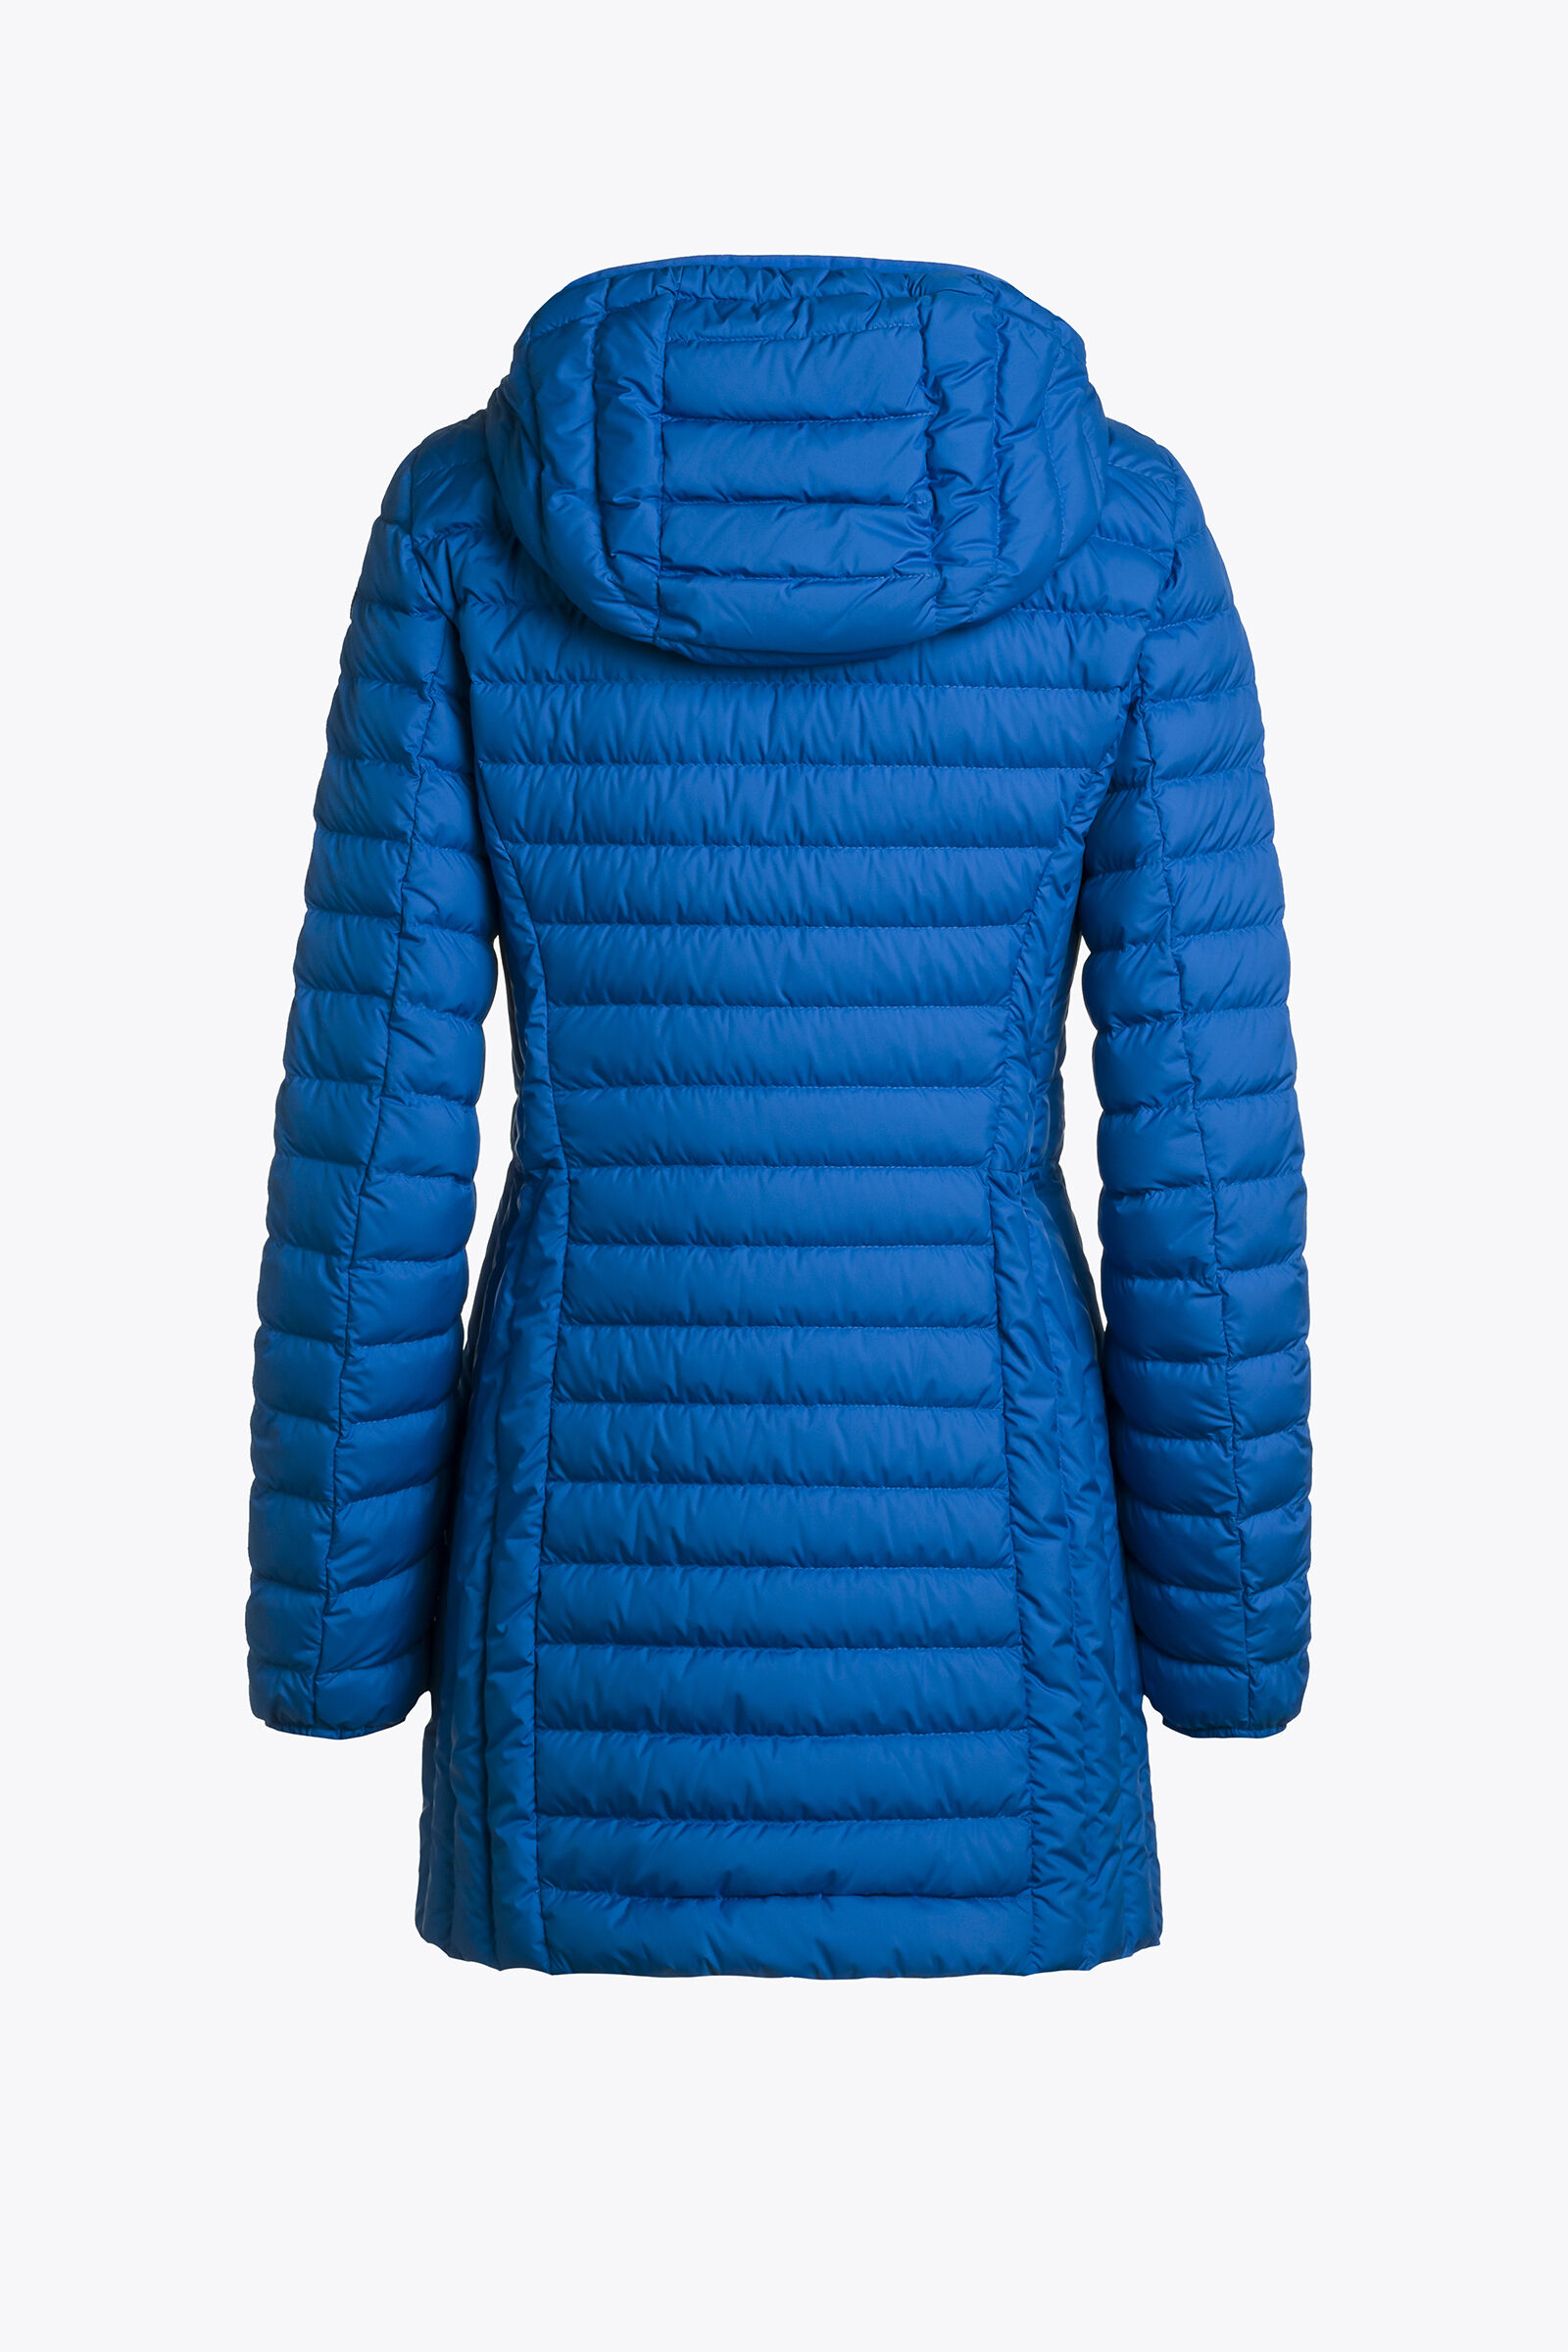 IRENE Puffers in CRAYON BLUE for Women | Parajumpers®